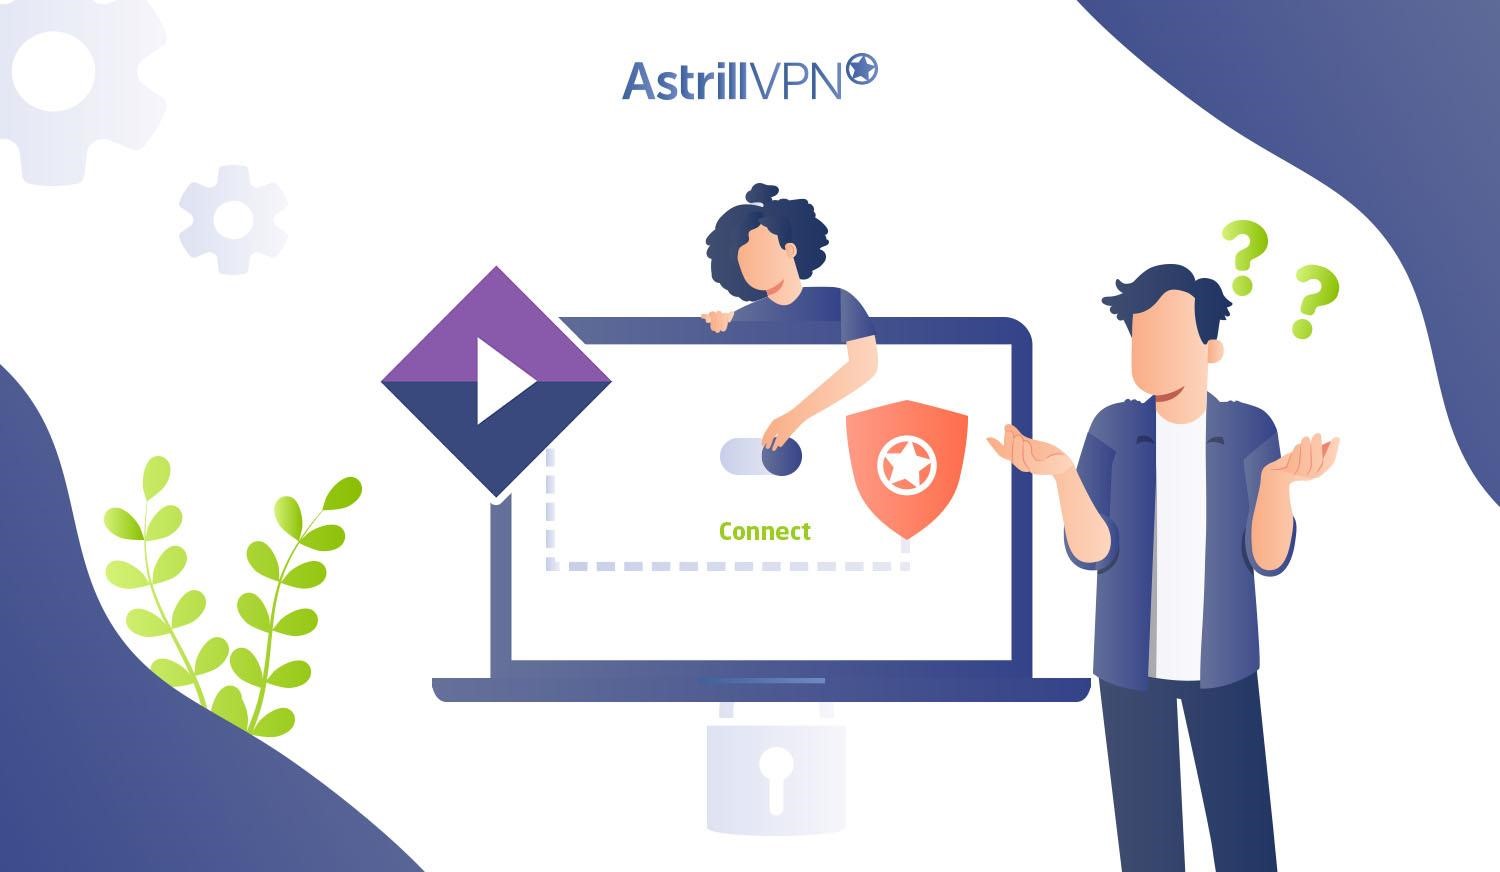 How to use AstrillVPN with Stremio?